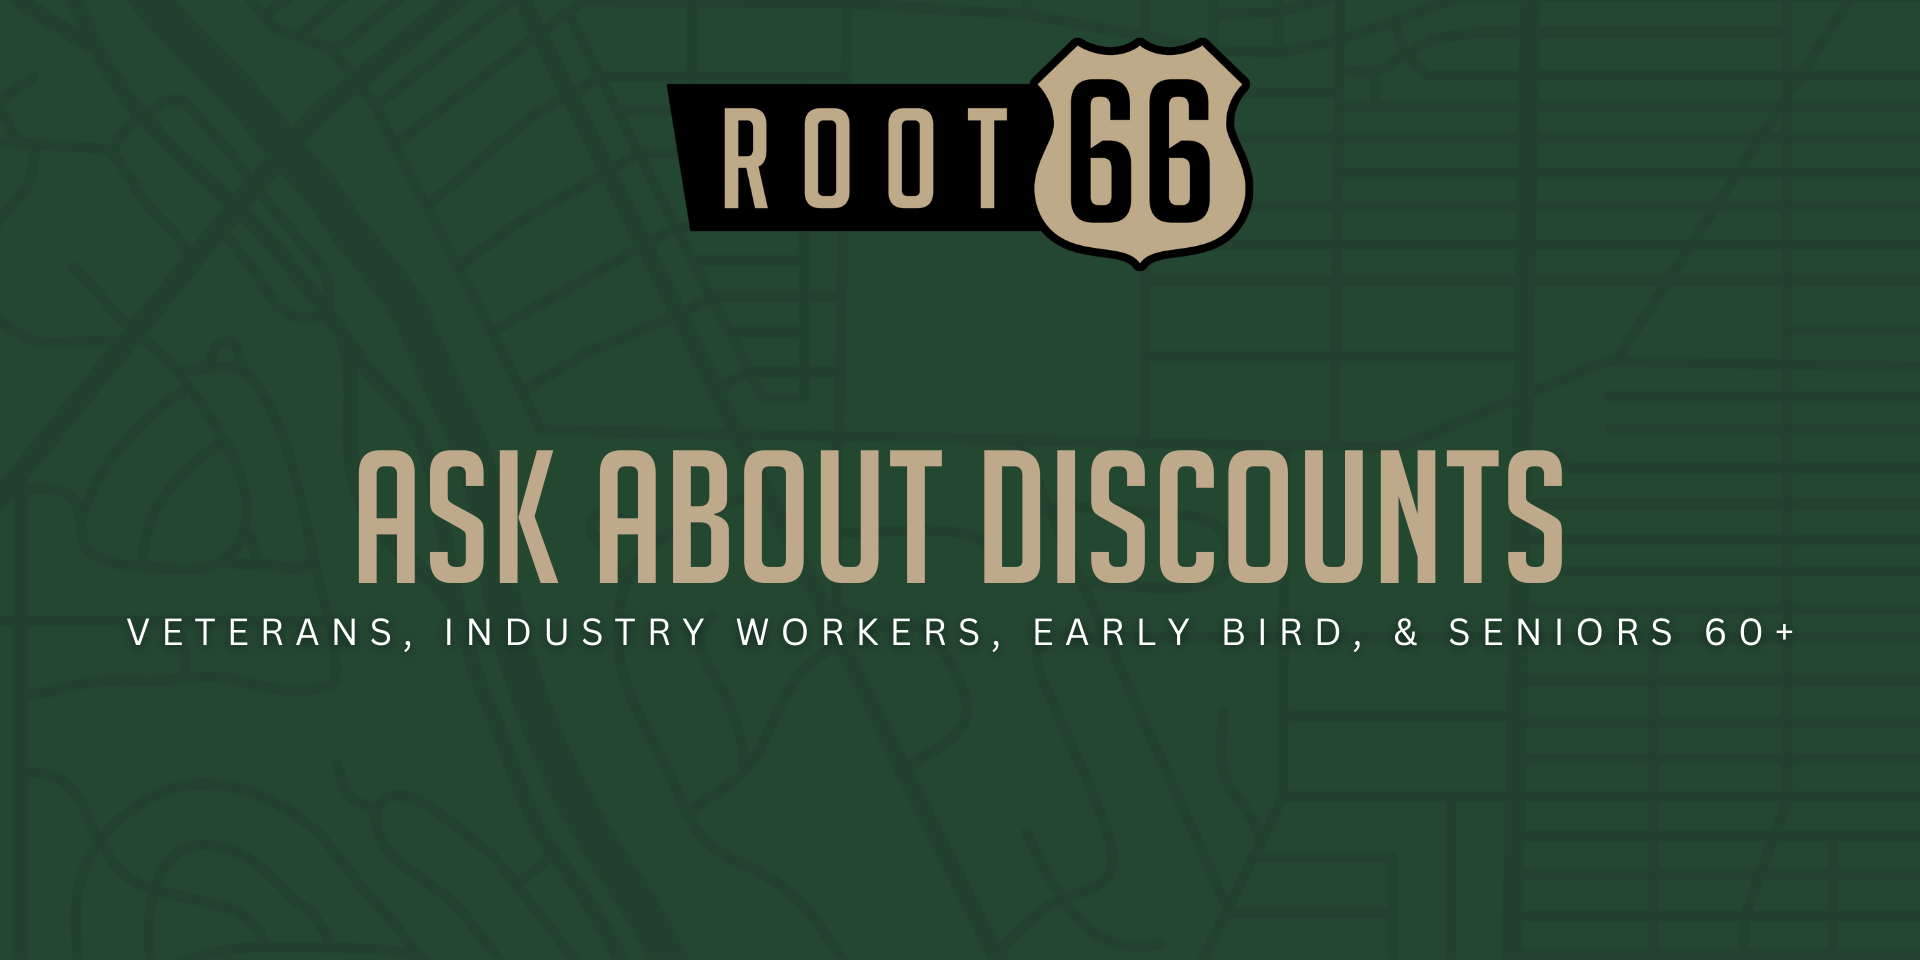 Explore Special Discounts for Veterans, Industry Workers, Early Birds, and Seniors 60+ – Inquire Today!